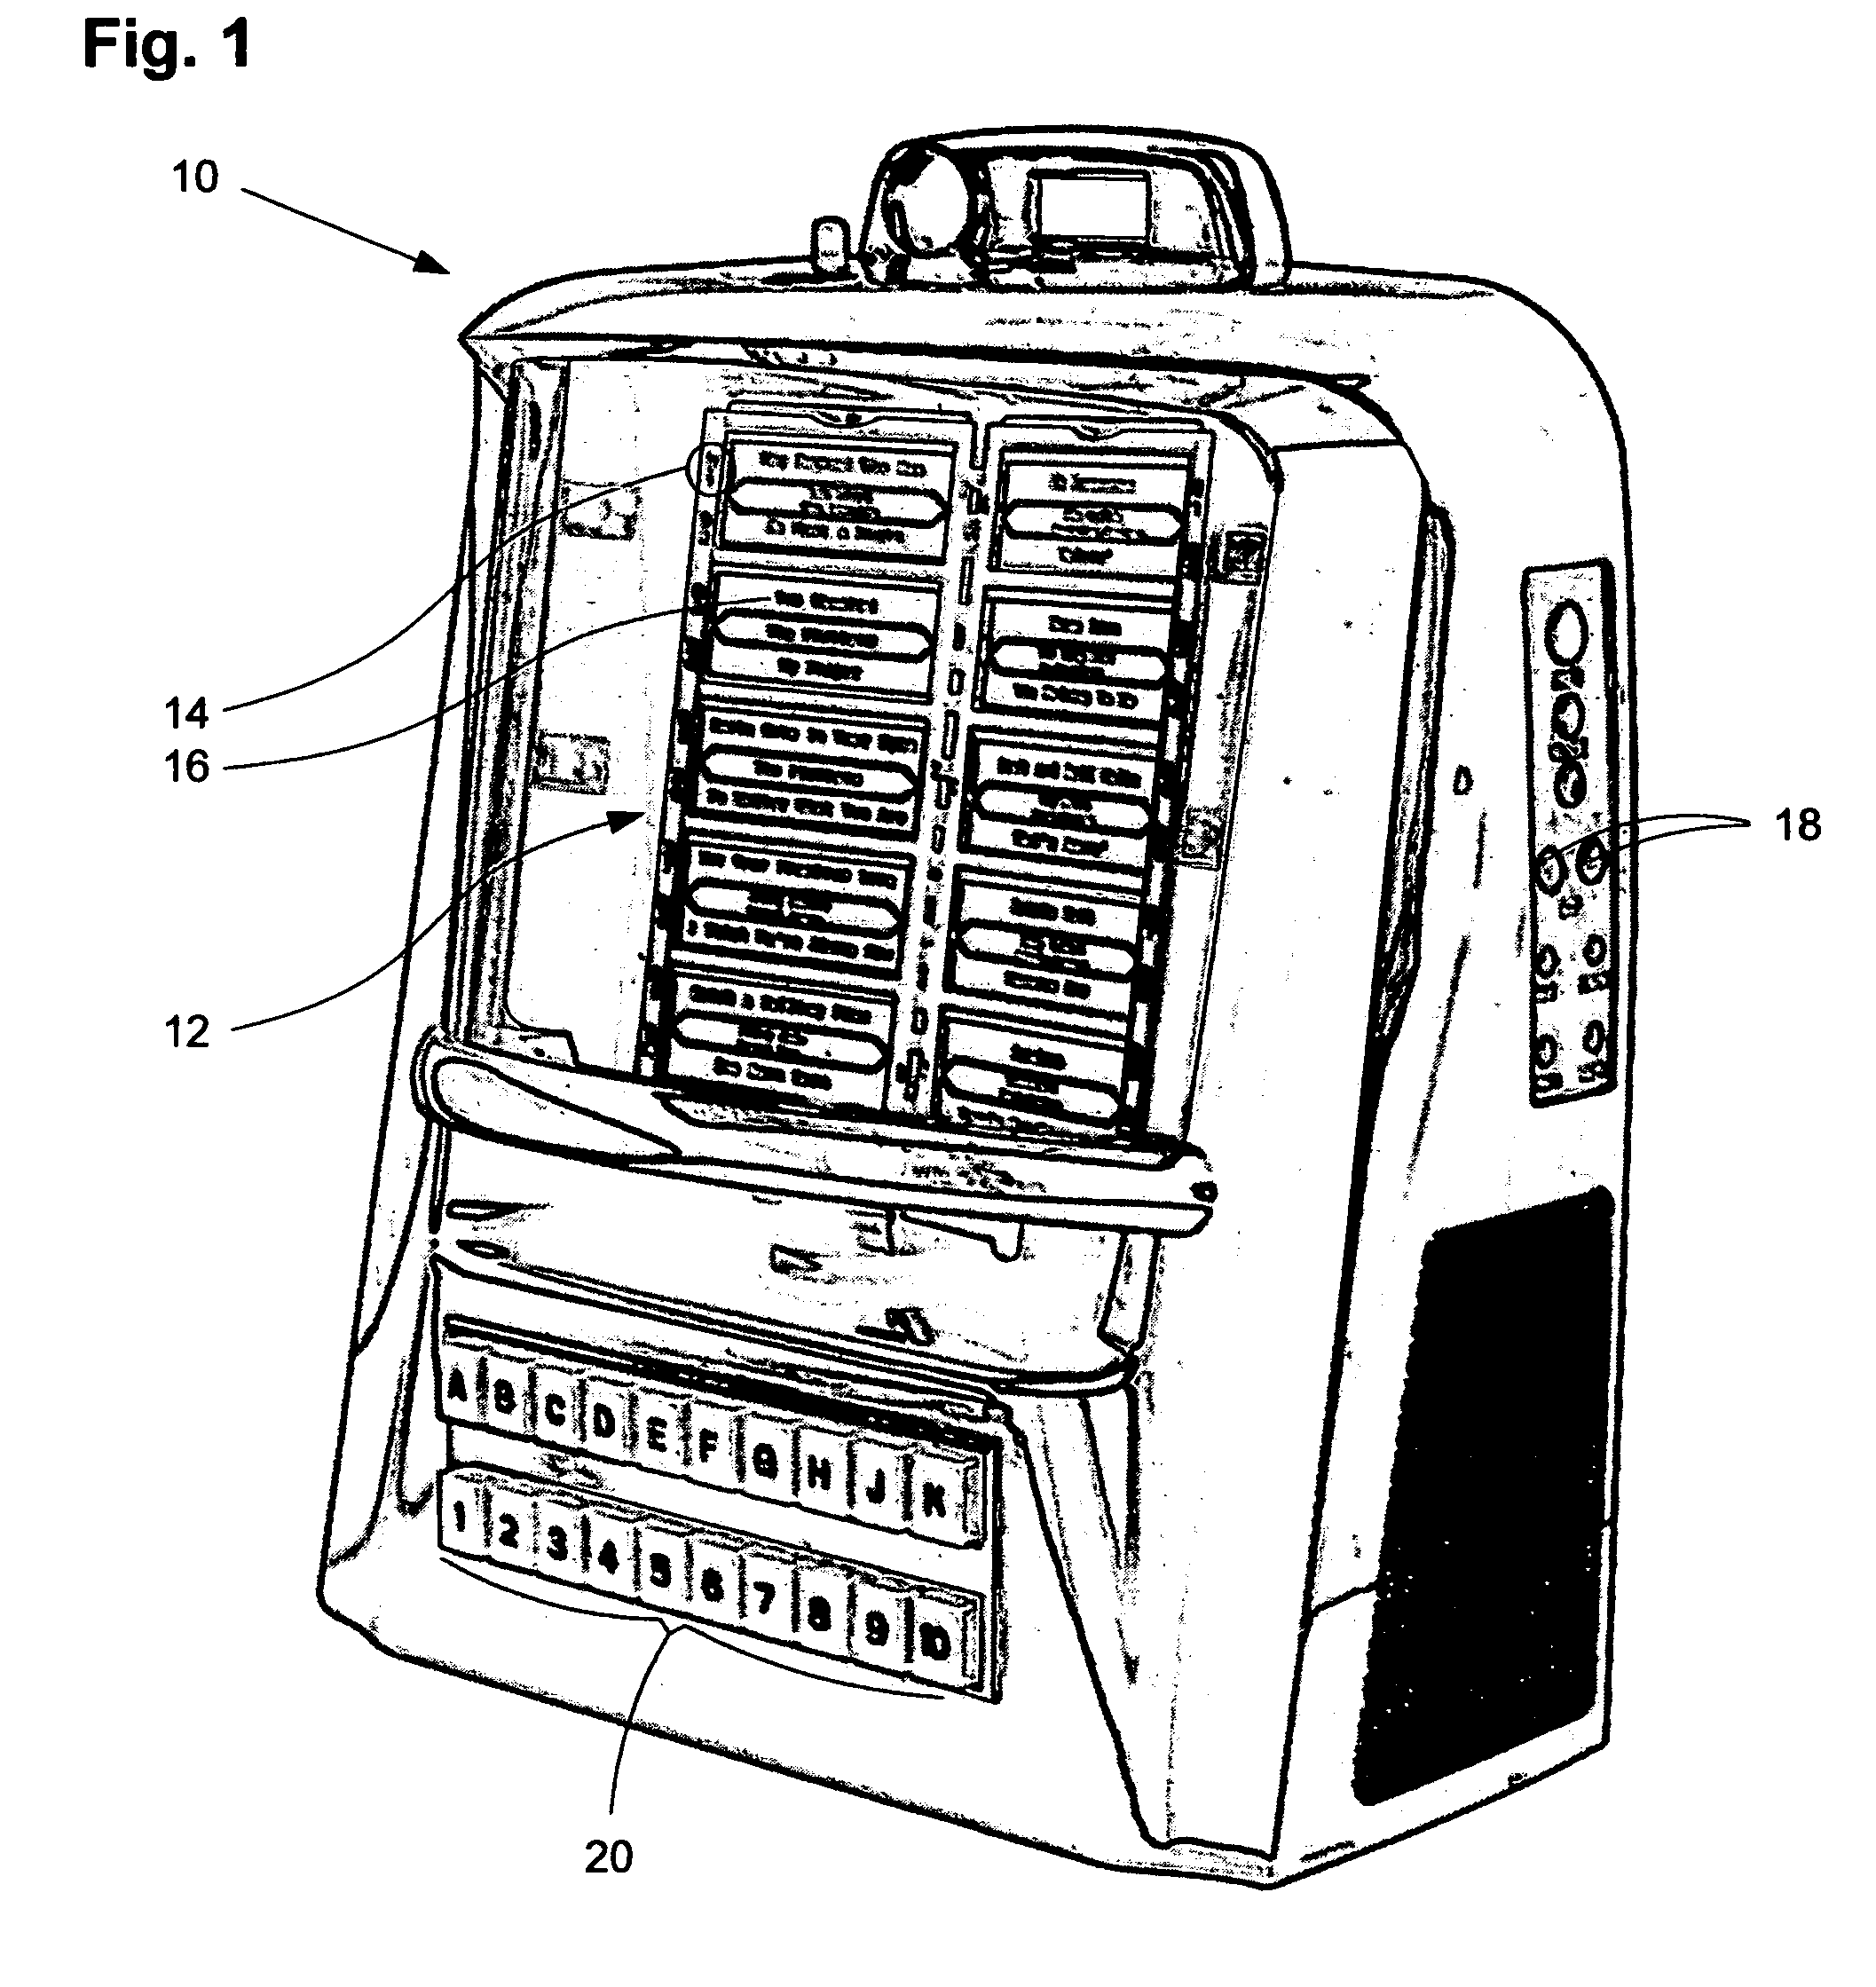 Sound effects method for masking delay in a digital audio player